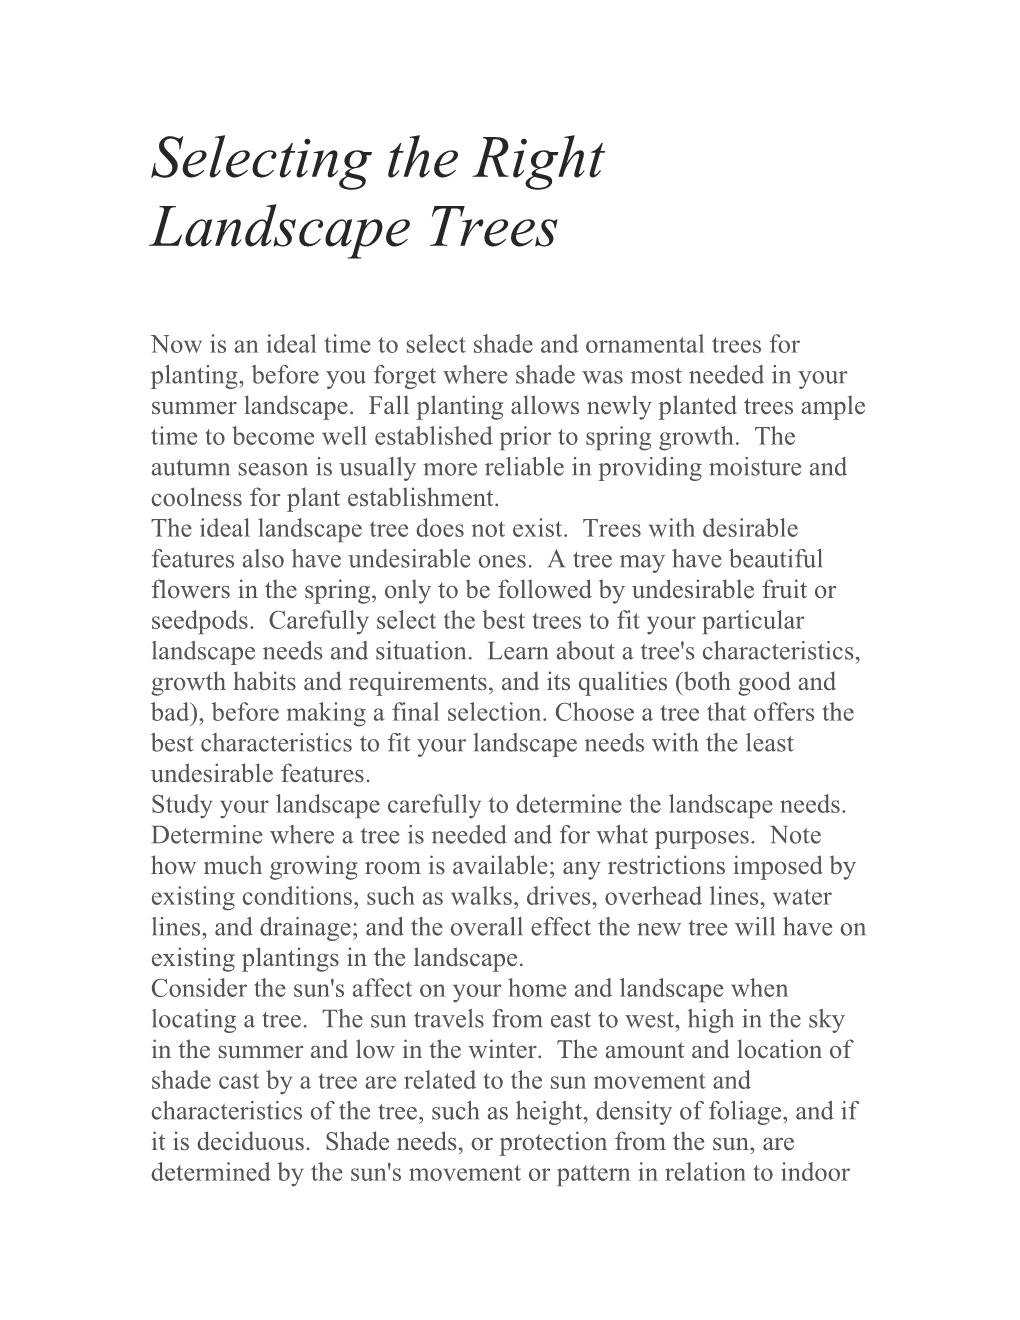 Selecting the Right Landscape Trees